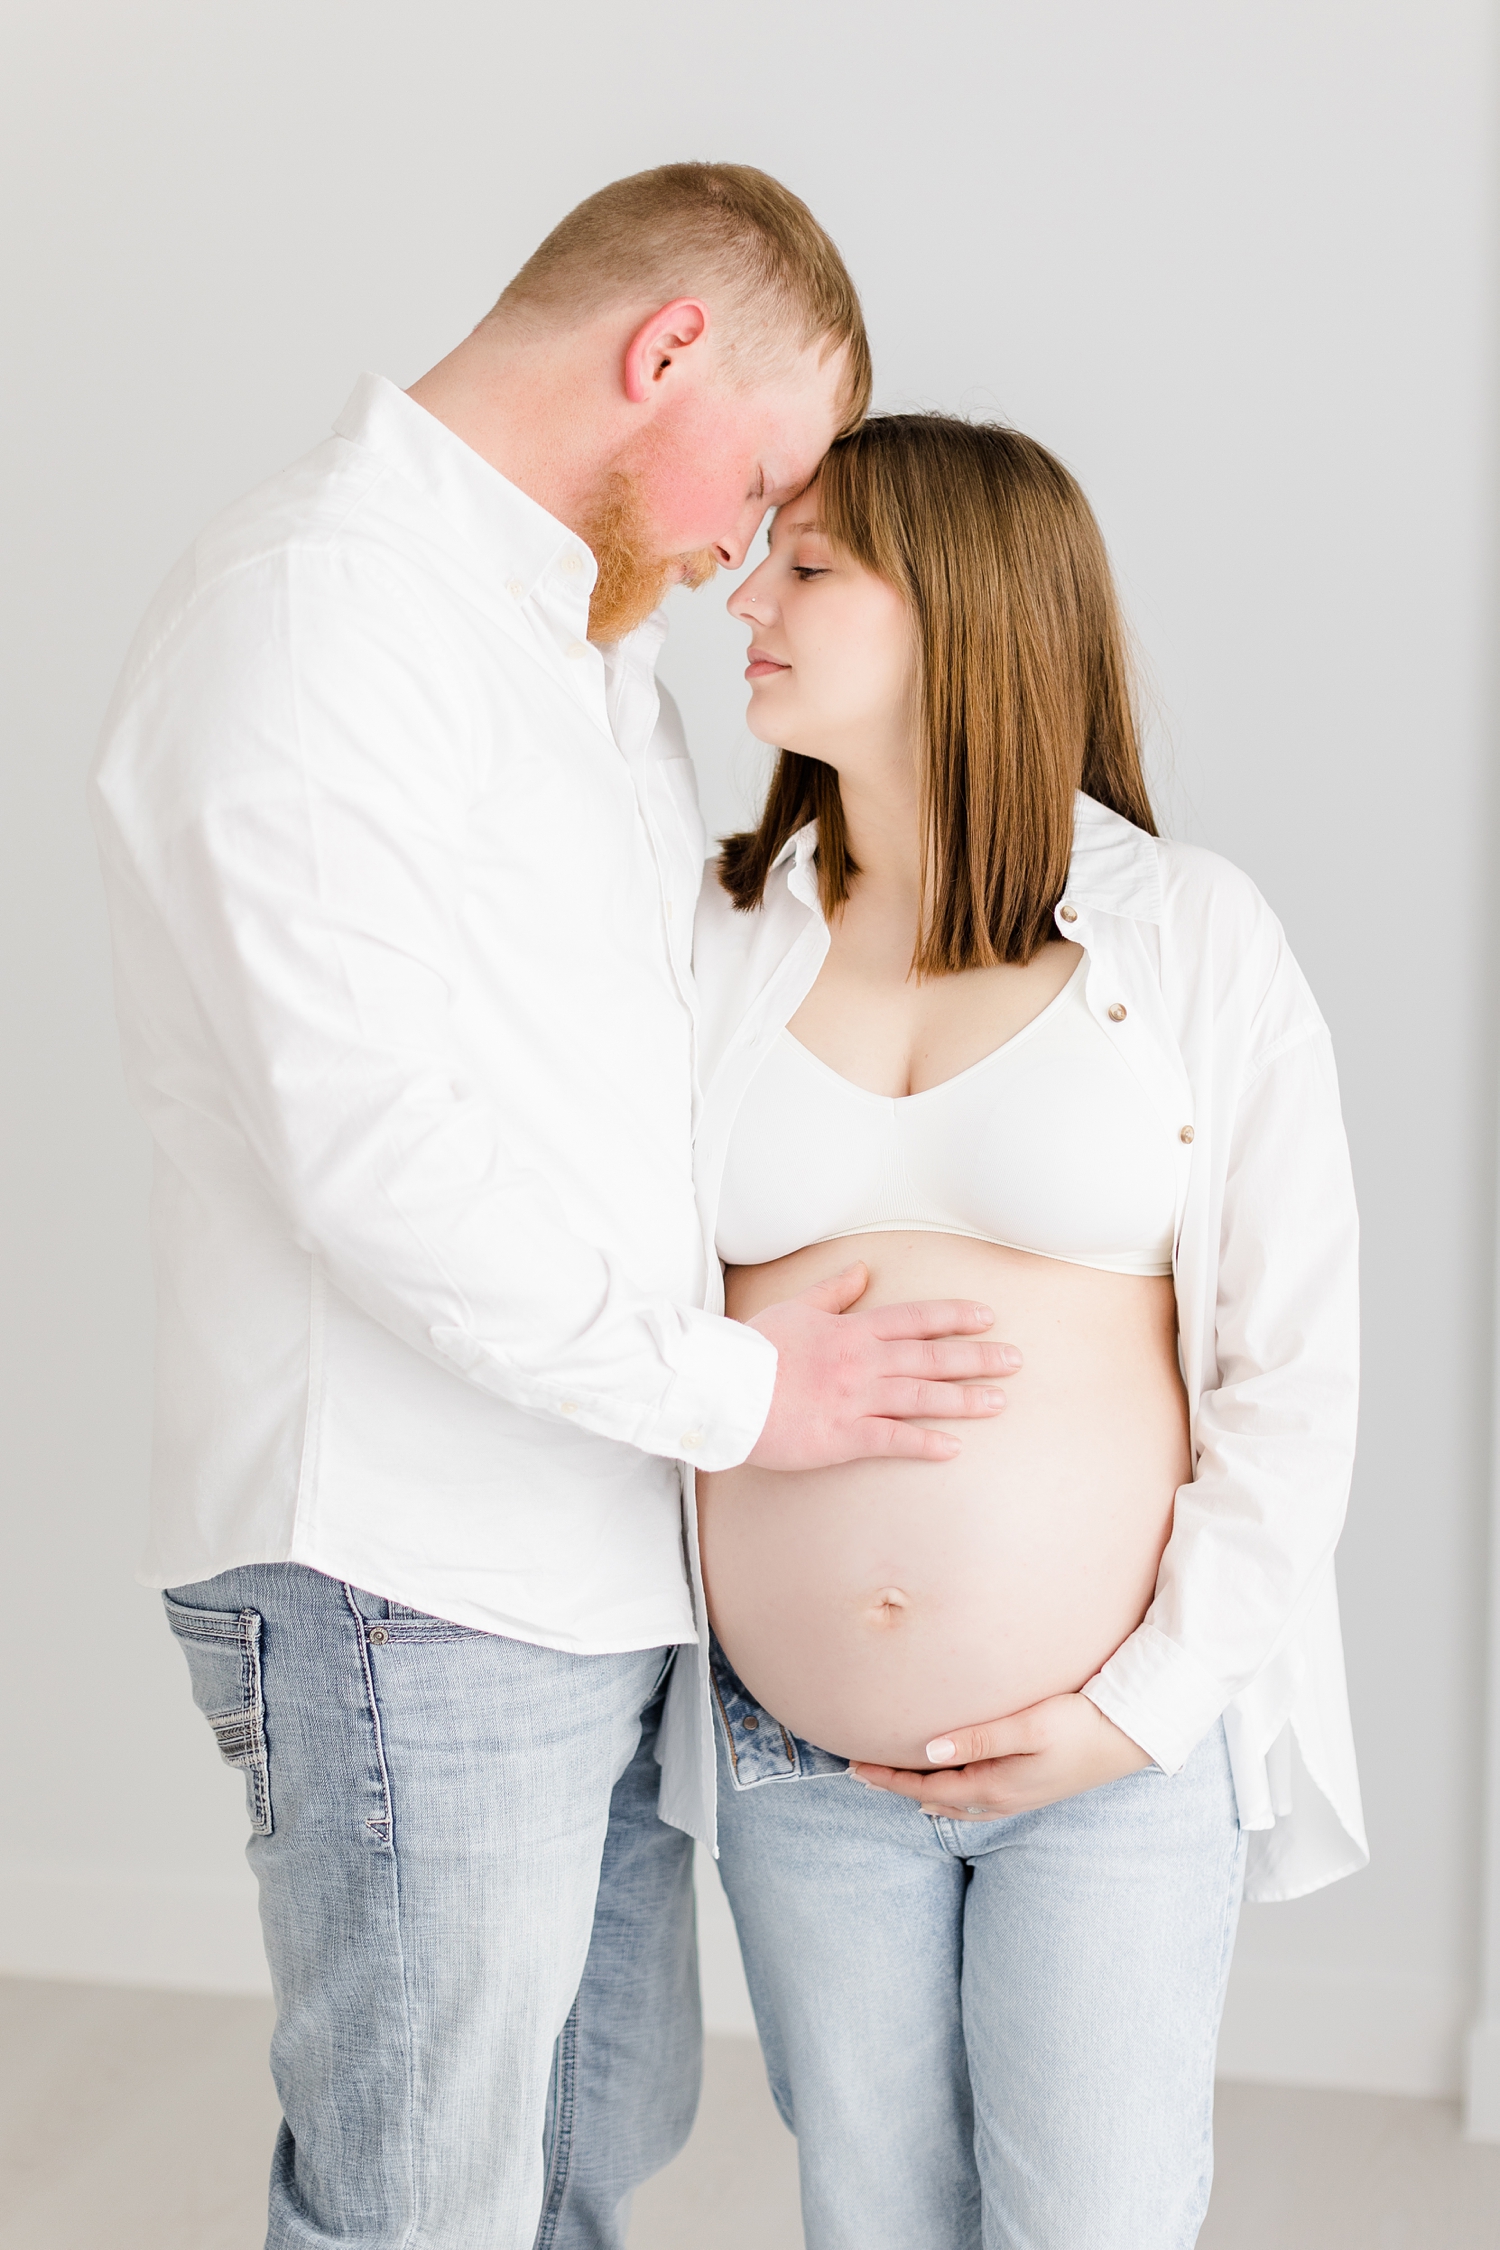 Madeline and Jeremiah rest their foreheads together as they both hold Madeline's baby belly | CB Studio Photography